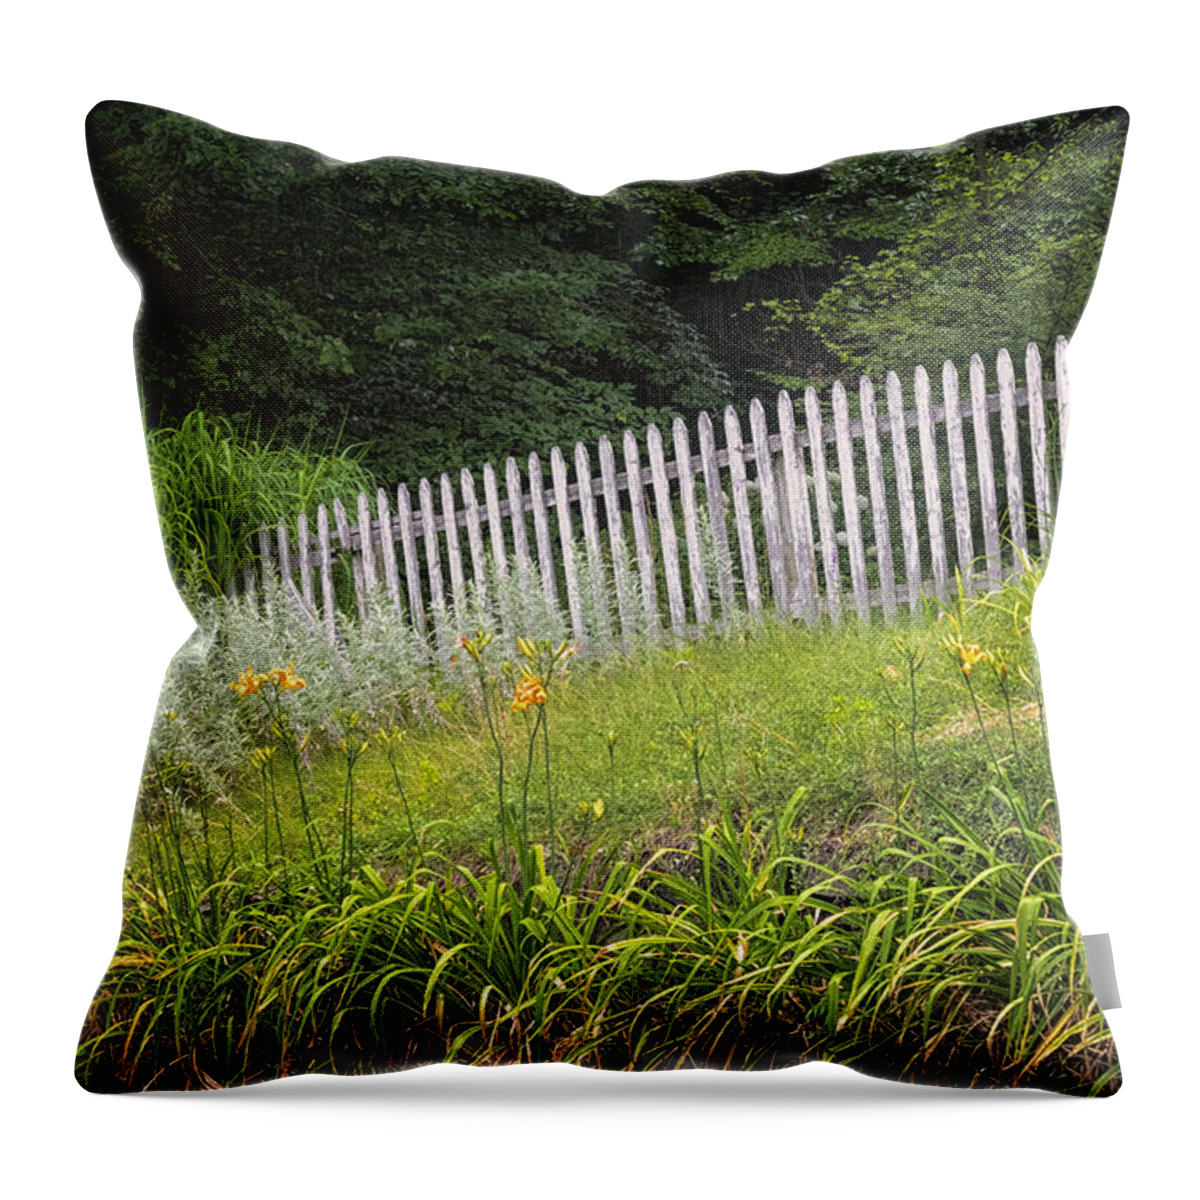 Williamsville Vermont Throw Pillow featuring the photograph Faded Fence by Tom Singleton